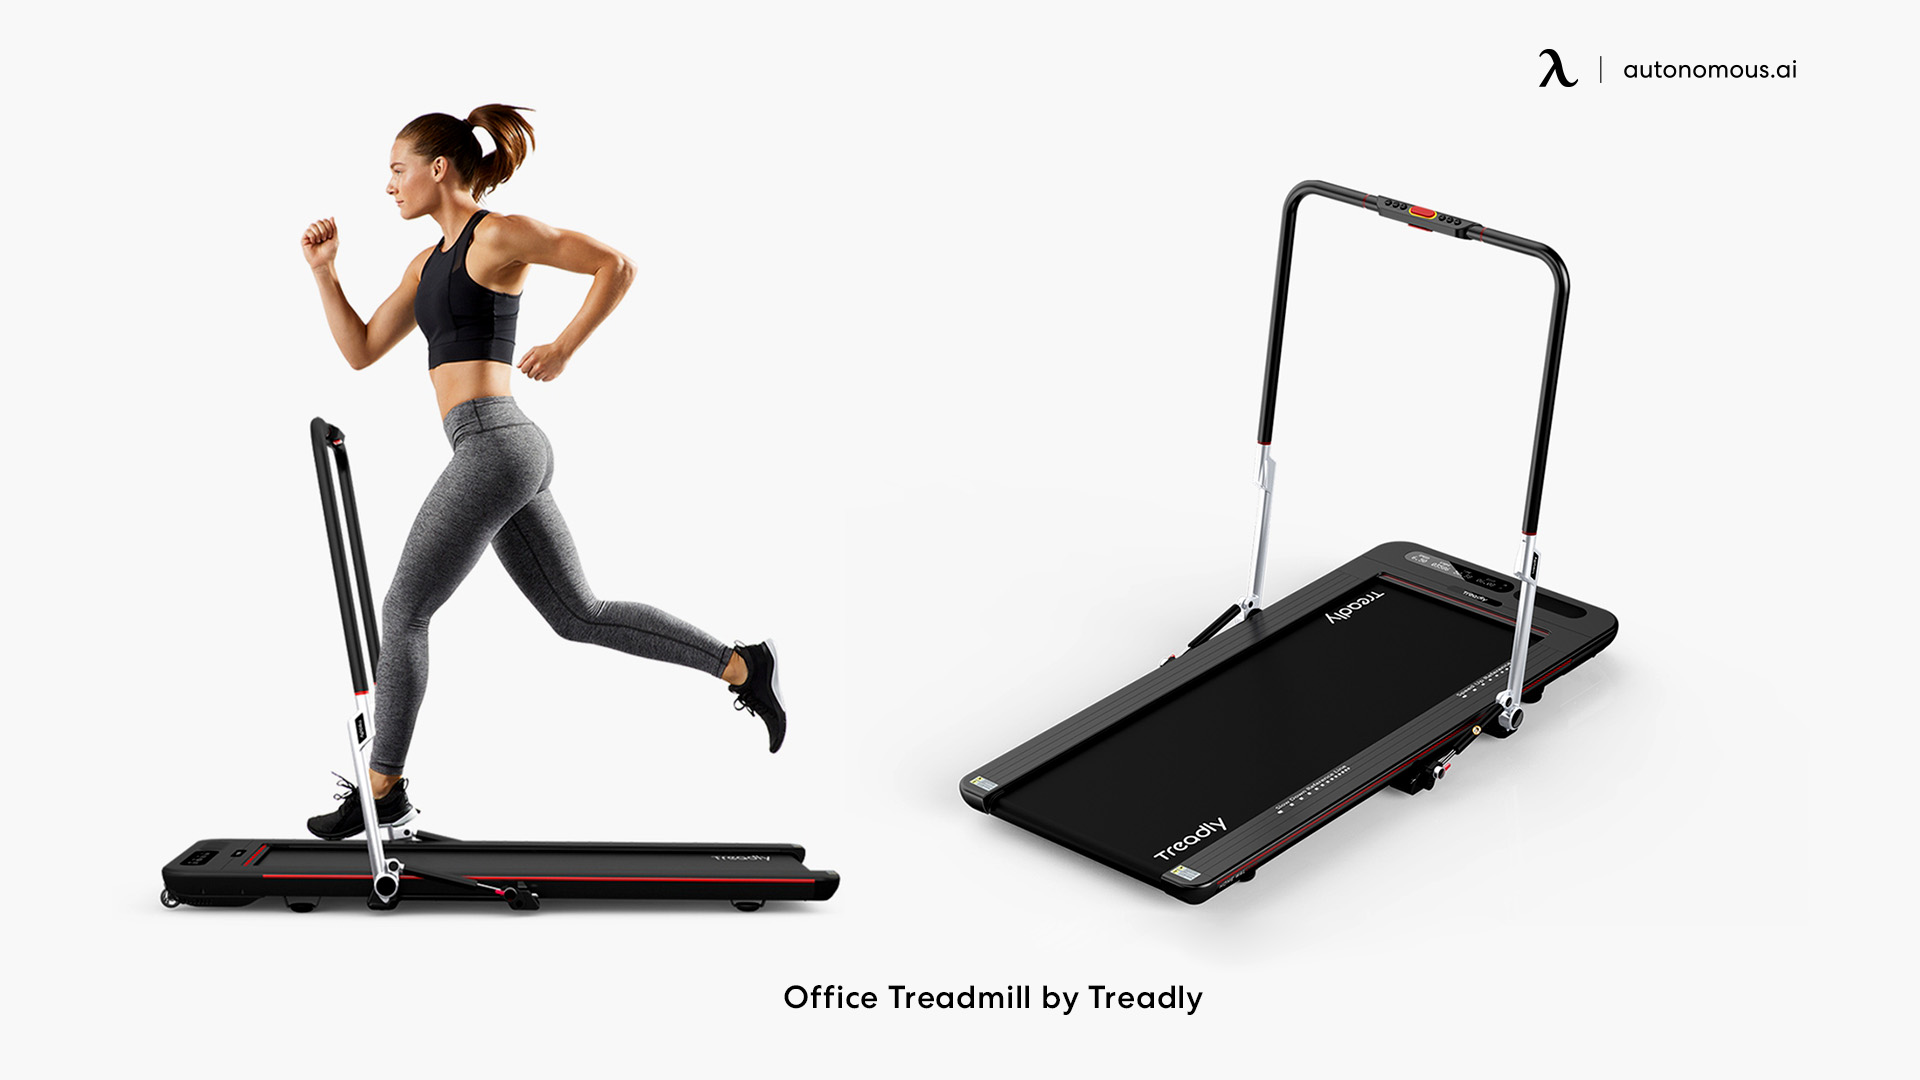 Office Treadmill by Treadly personal training equipment